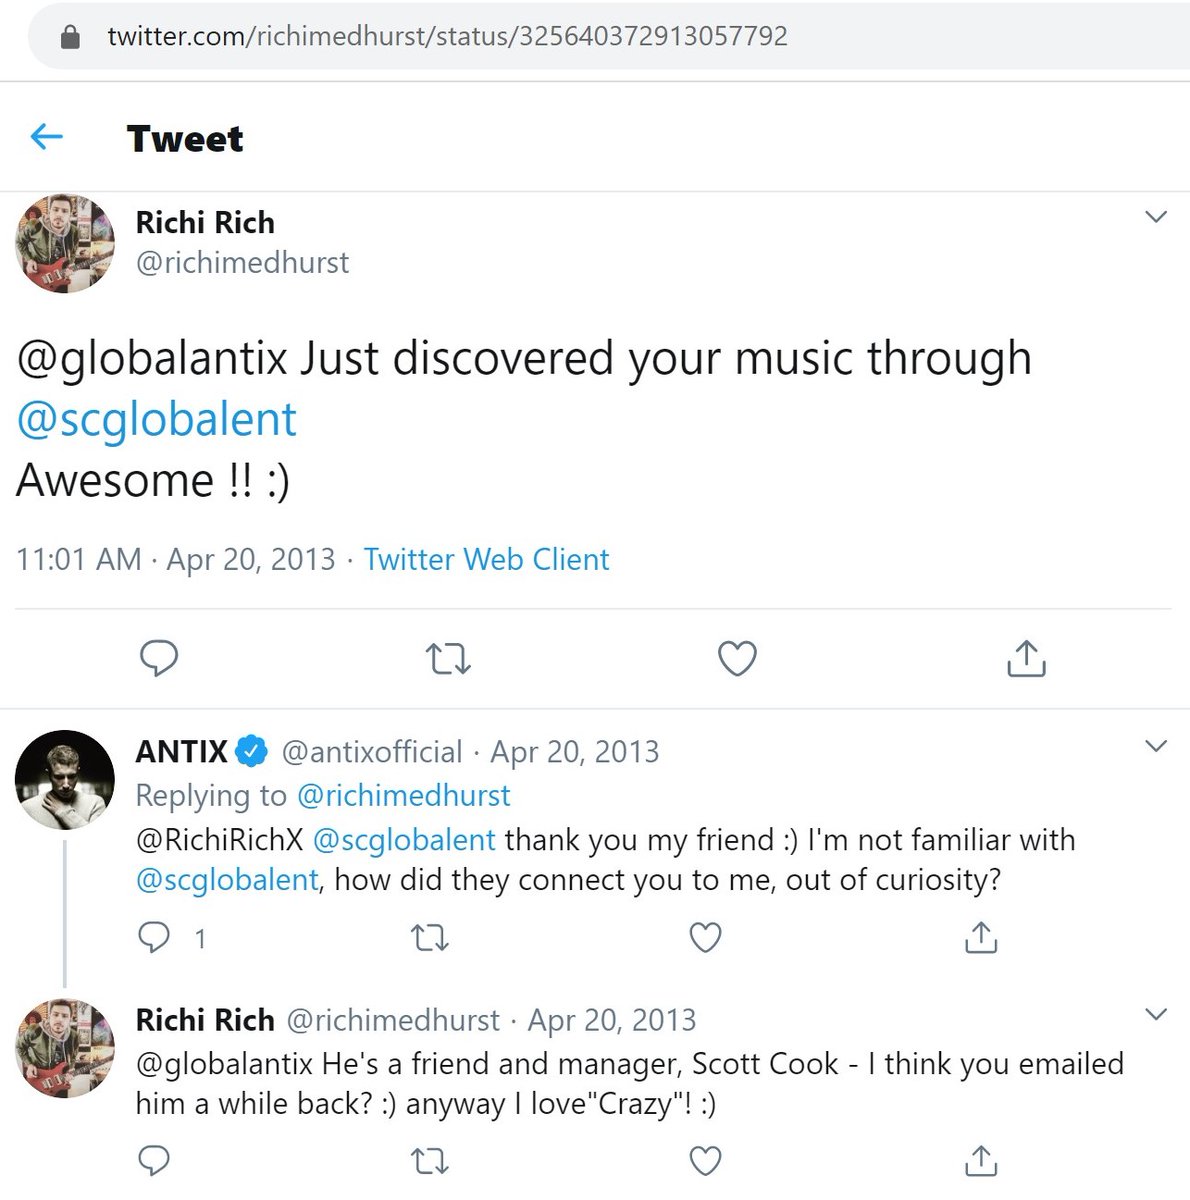 [12] A few years ago, the guy was repped by a group called SC Global Entertainment for awhile, under his rap name "Richi Rich." His manager was Scott Cook.